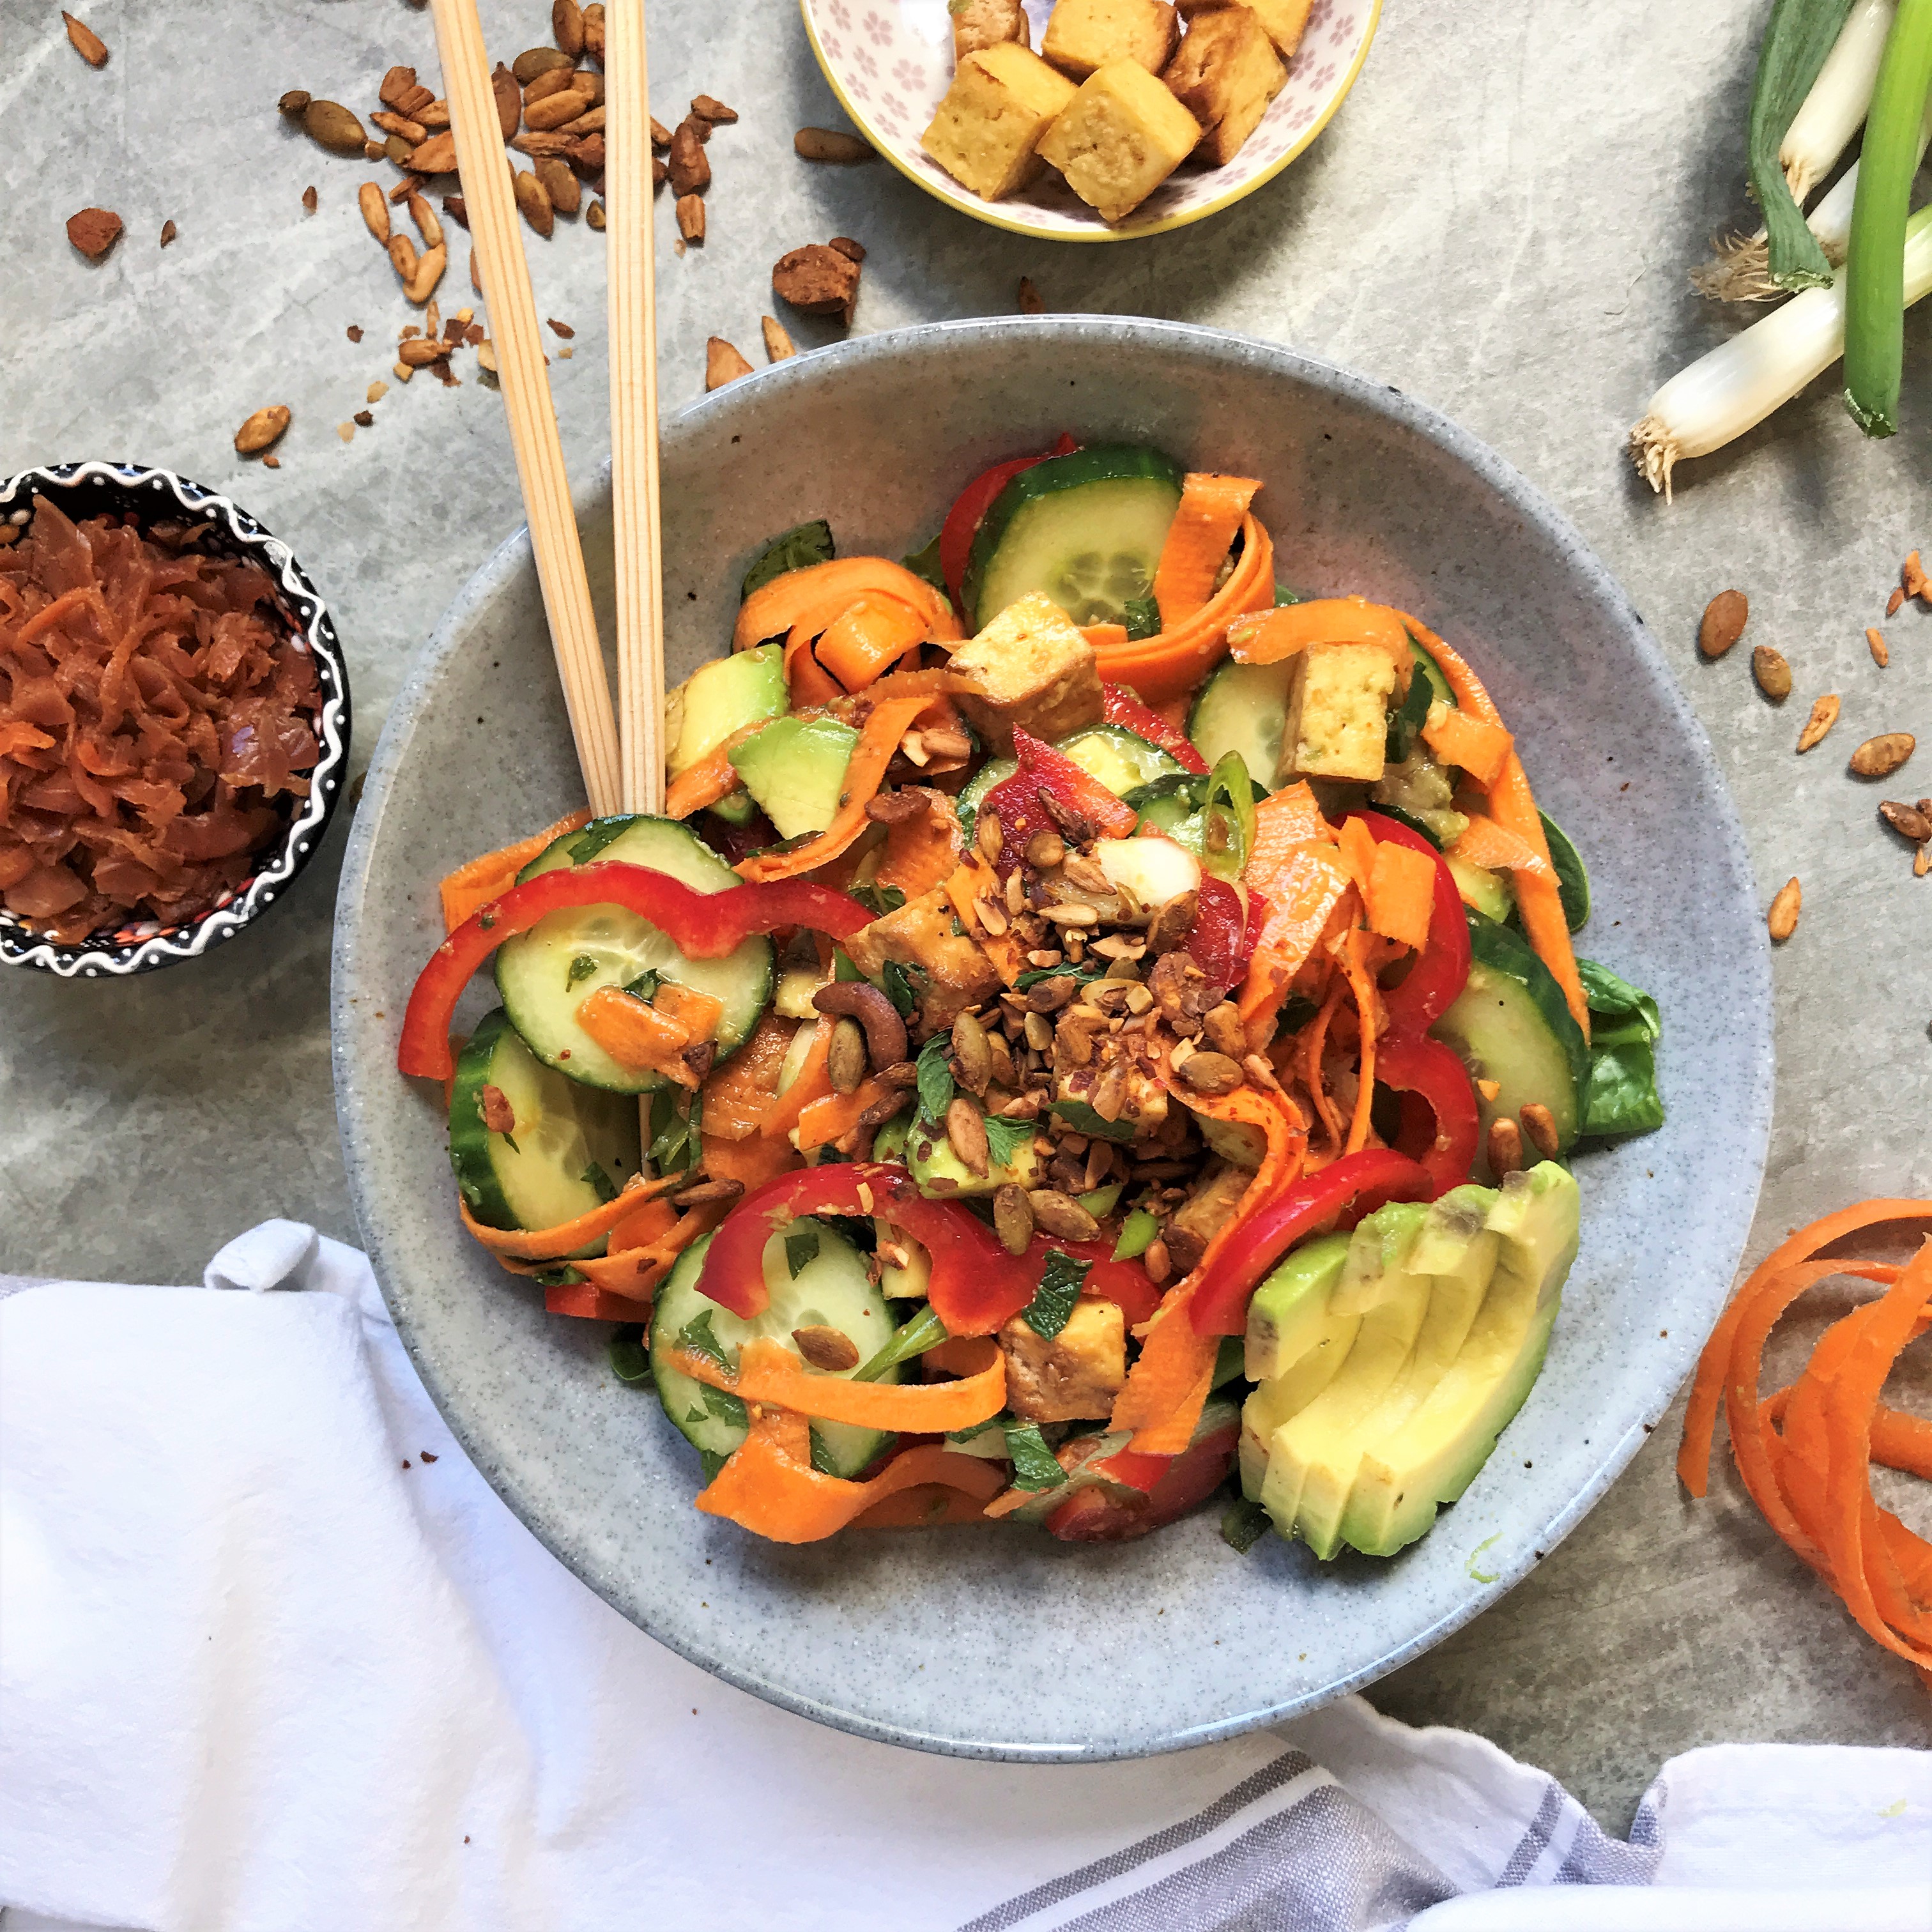 Spicy Ginger Cucumber Salad with Smoked Tofu